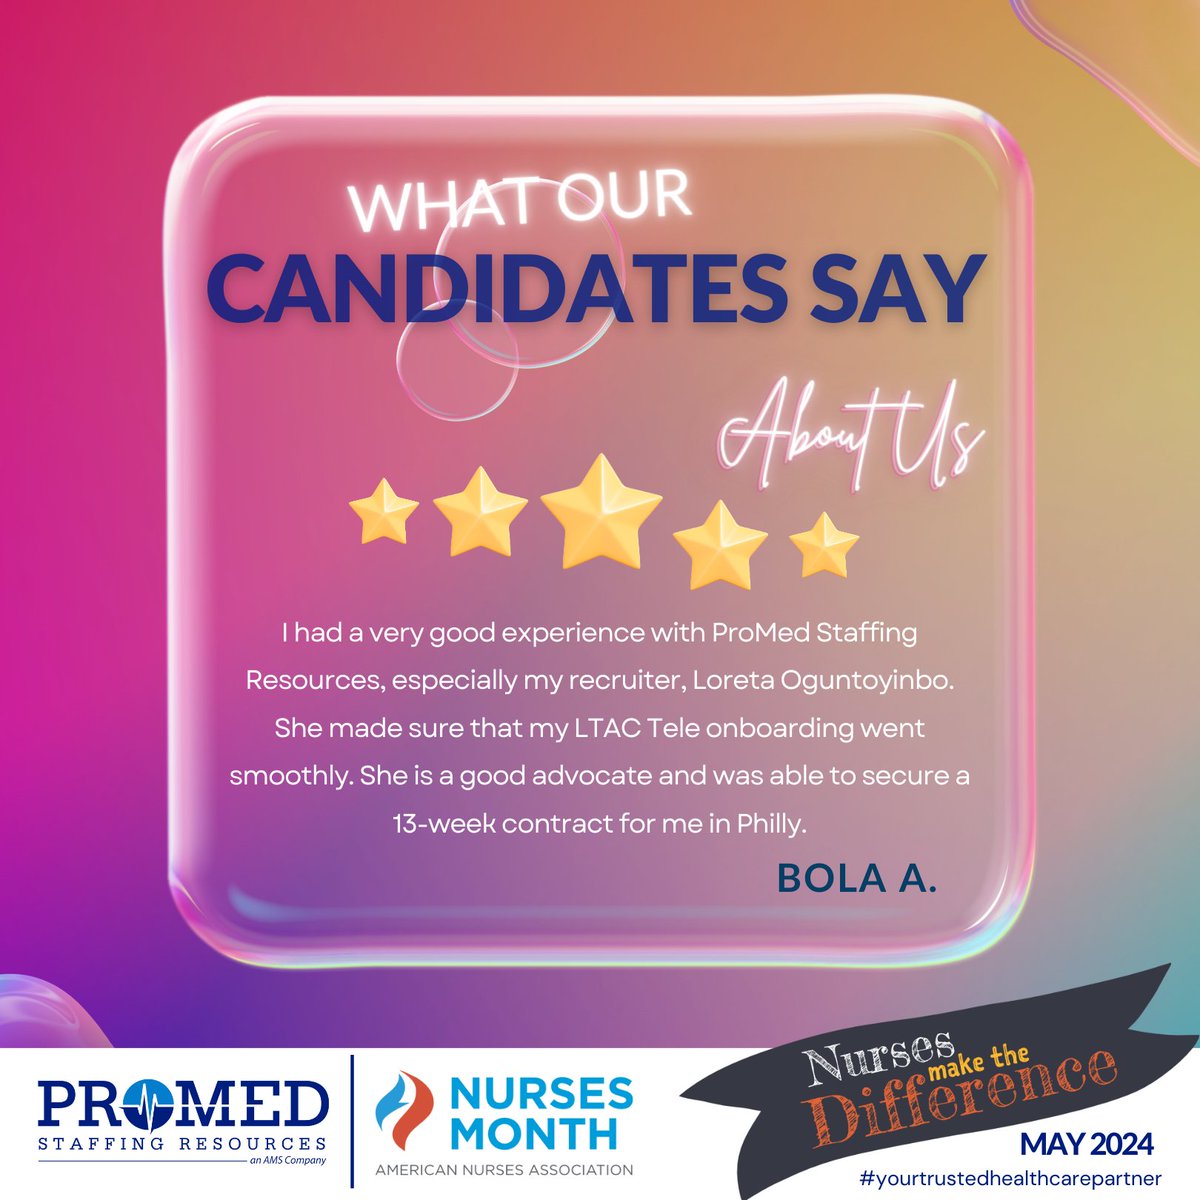 Thank you for sharing your positive experience with Loreta Oguntoyinbo and ProMed Staffing Resources! Your feedback is greatly appreciated!

#googlereview #clientsatisfaction #candidatesatisfaction #weareheretohelp #bestreviews #fivestarsreview #greatplacetowork #GPTW #promedsr